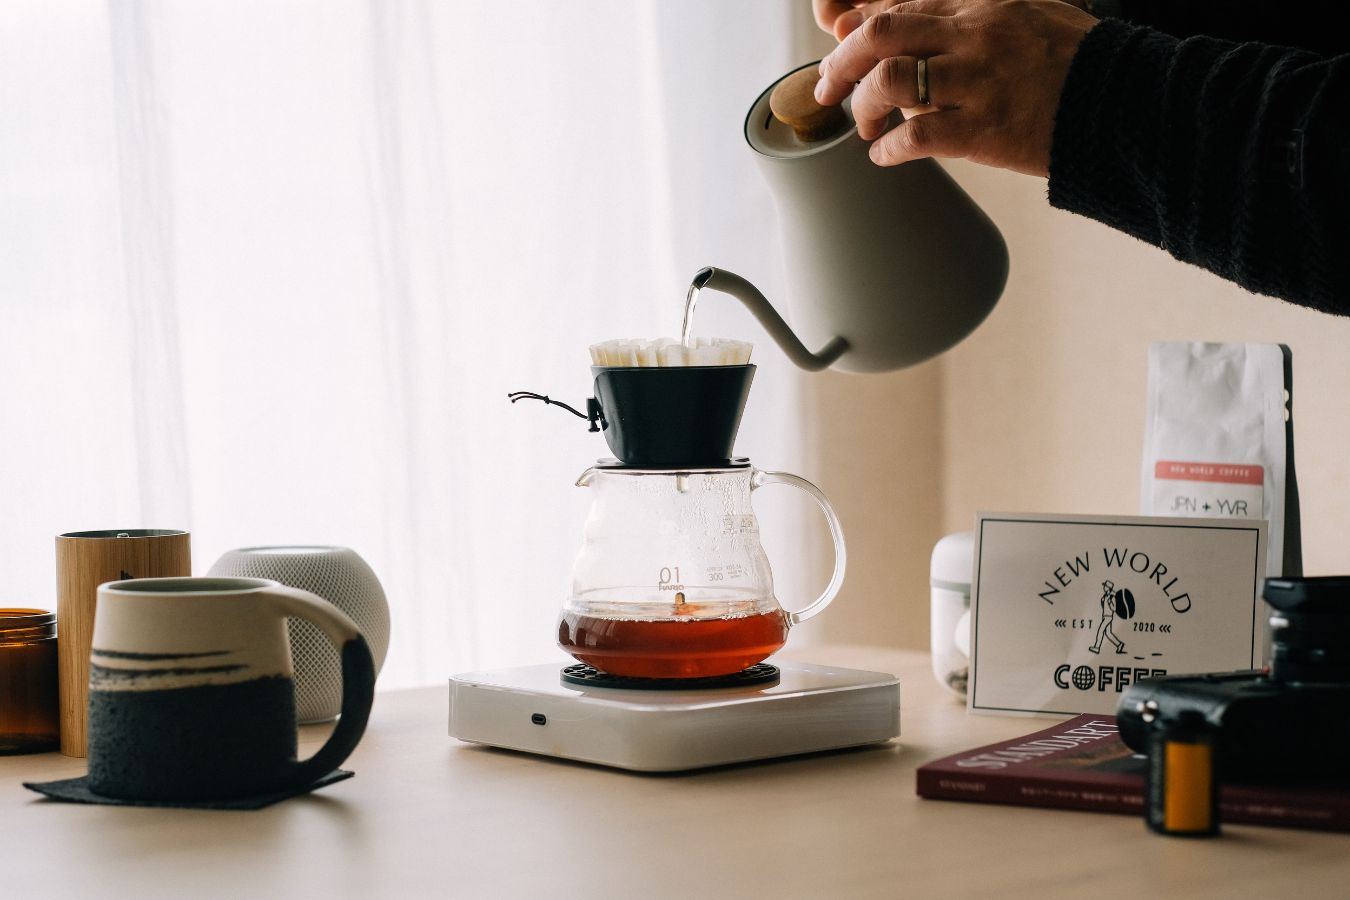 A Beginners Guide to Pour Over Coffee Brewing